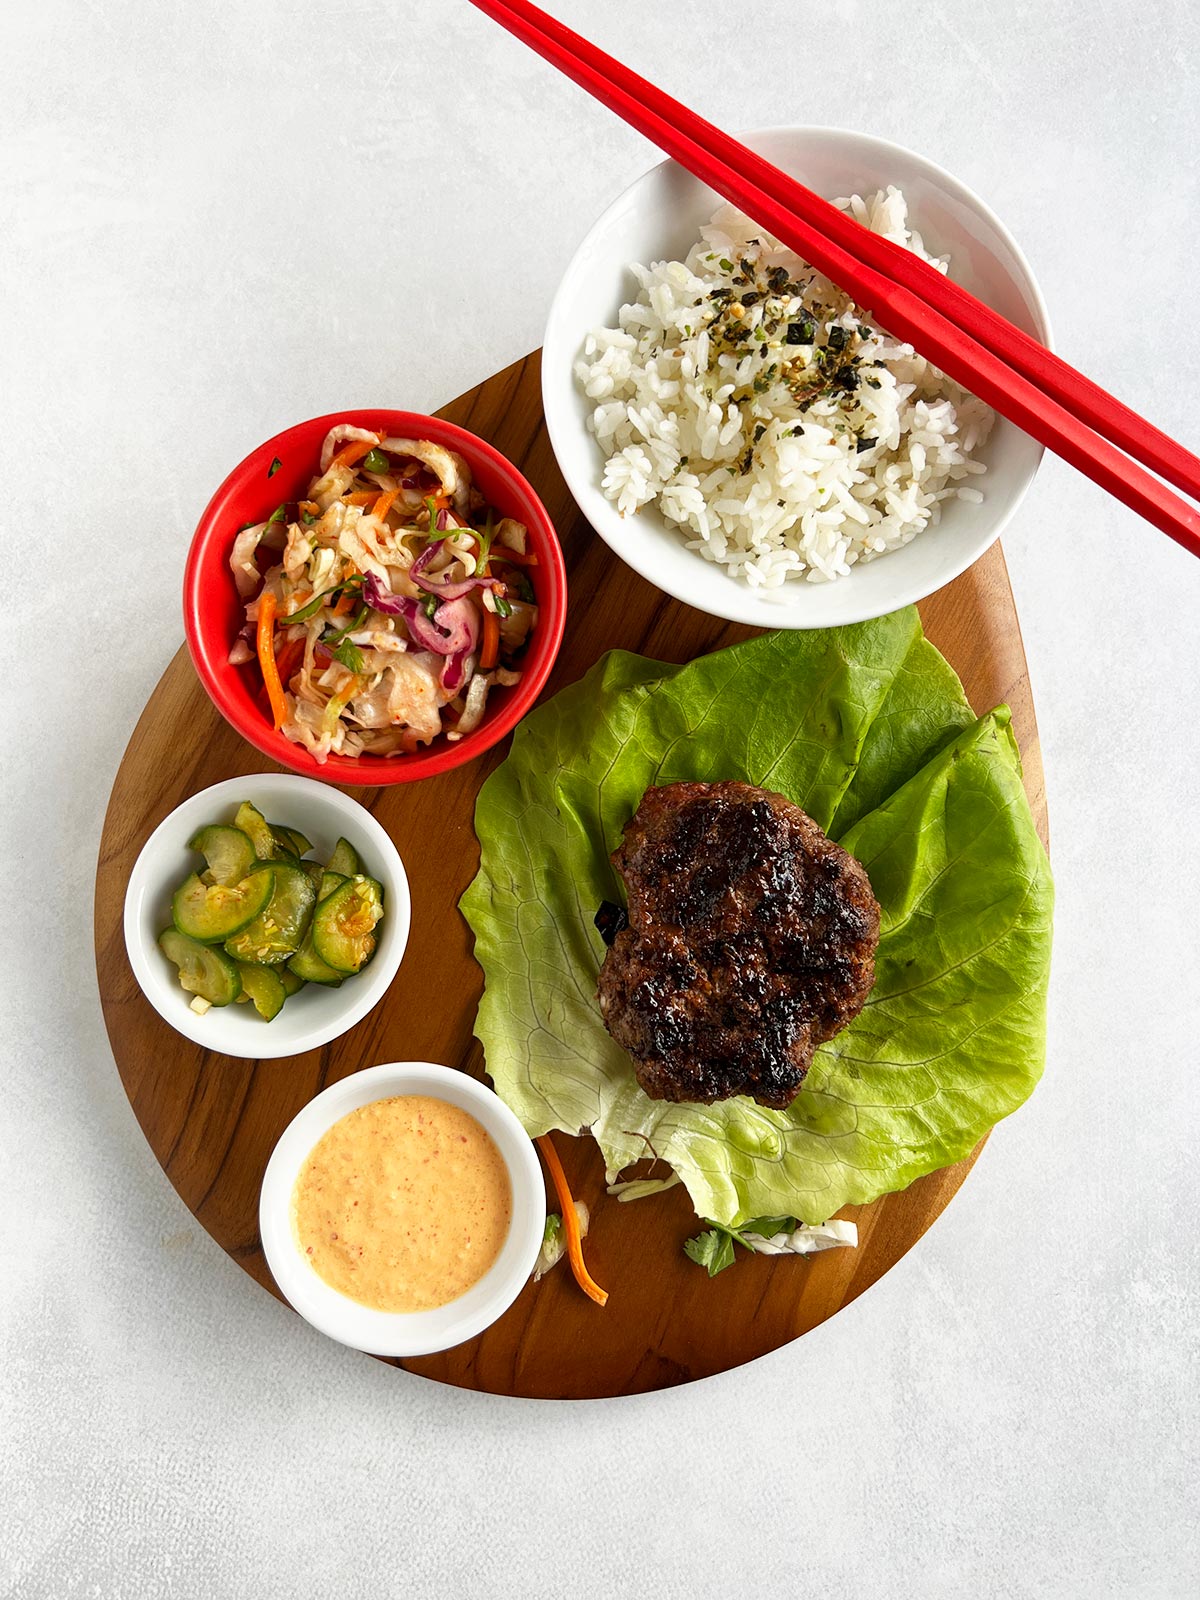 Burger on lettuce on a wooden board with kimchi sauce, Korean cucumbers, coleslaw and rice.